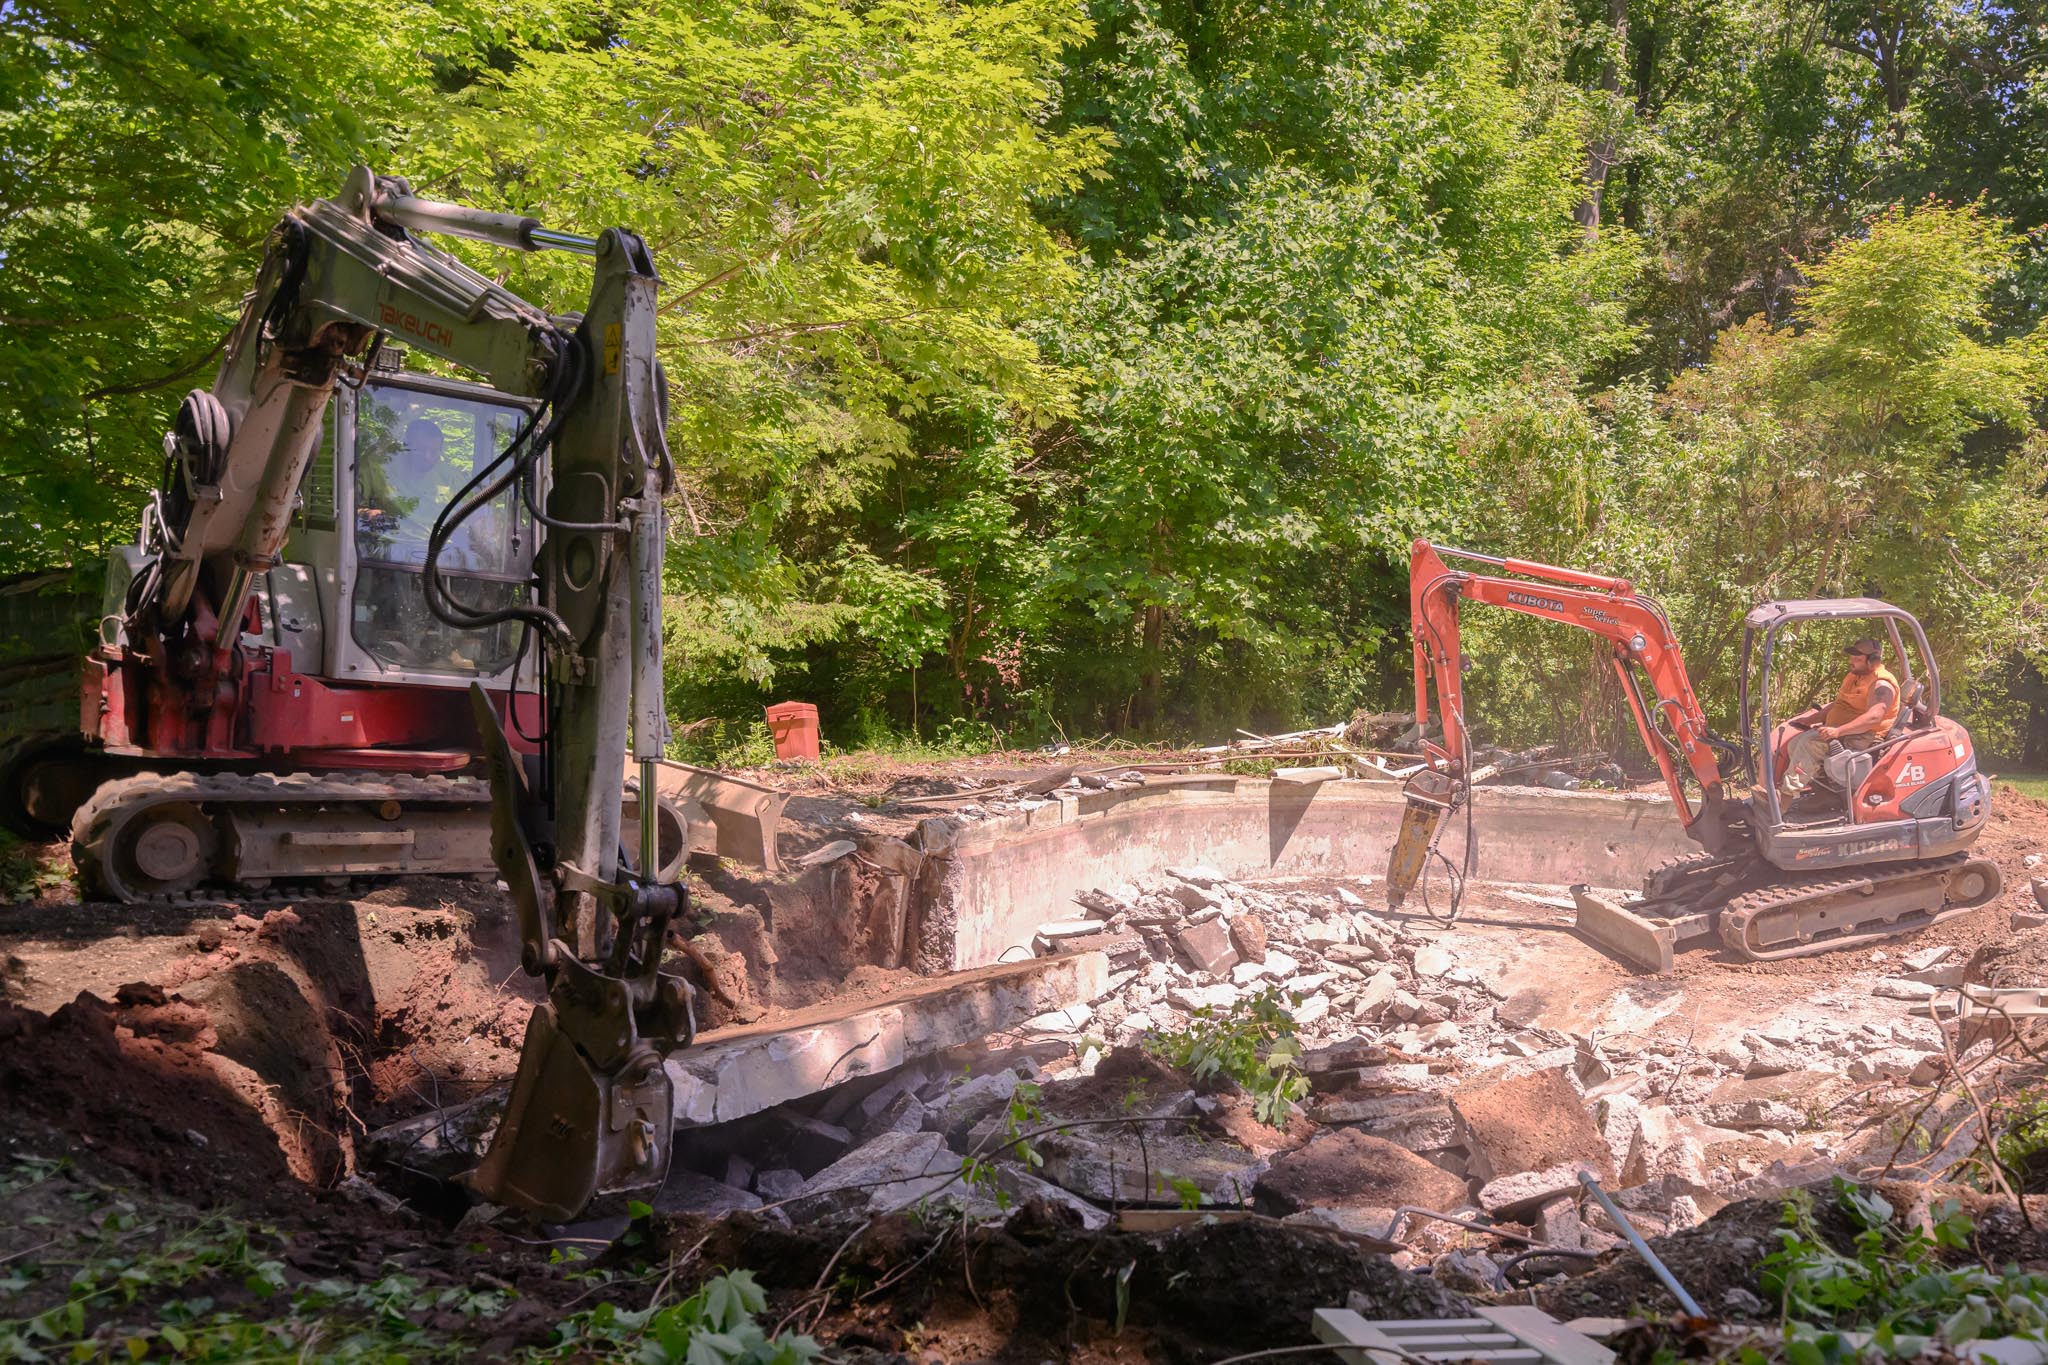 Construction equipment in the woods: A scene showing heavy machinery amidst trees, engaged in construction activities.